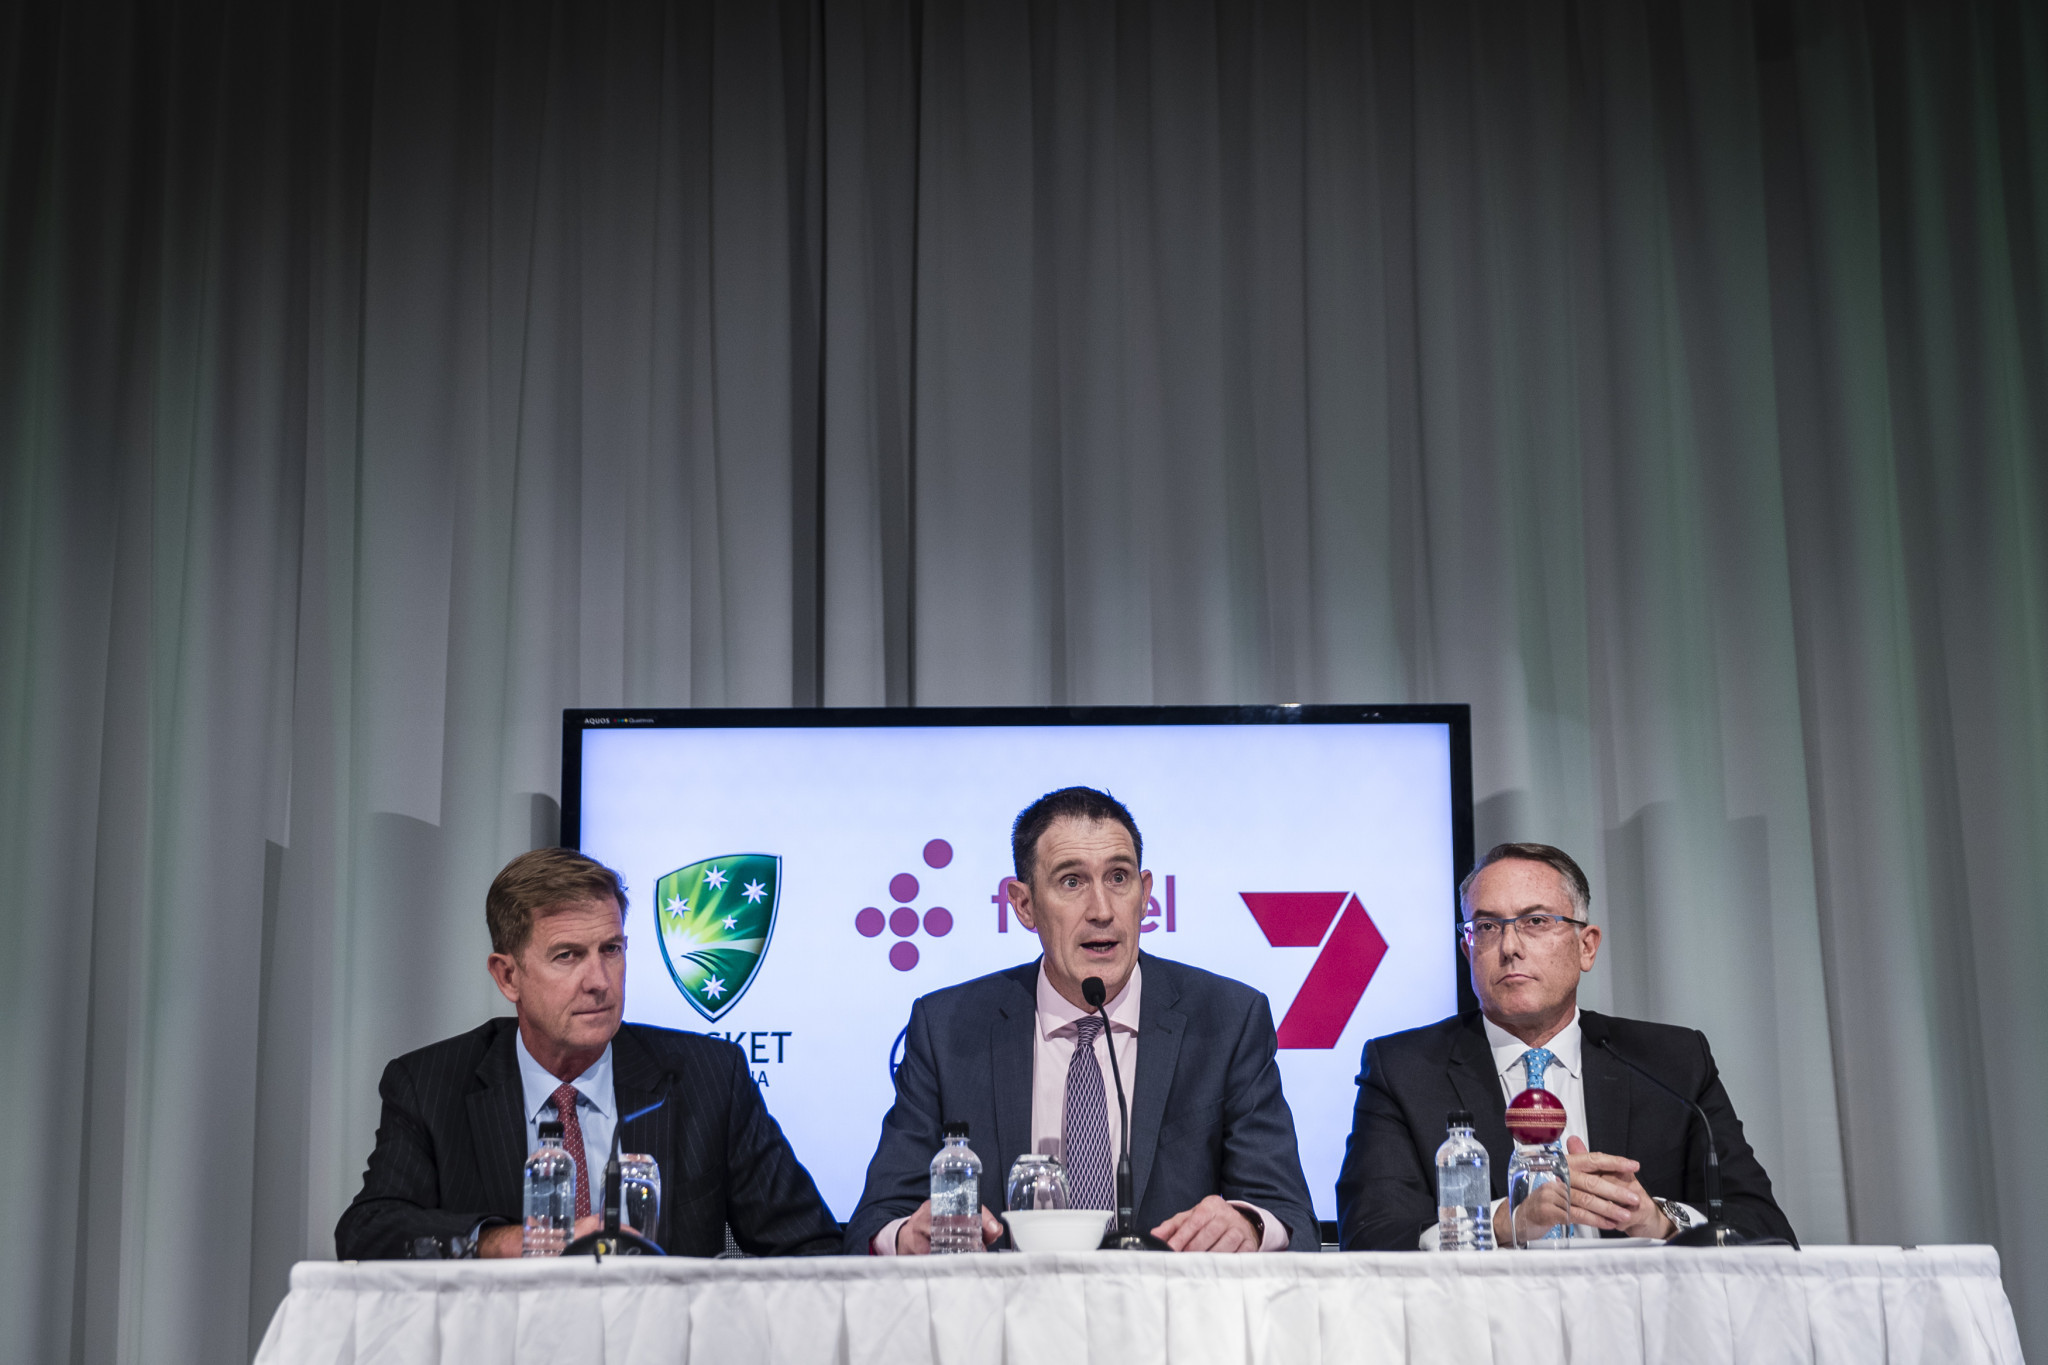 Cricket Australia chief executive James Sutherland, centre, claimed there were no issues with the new deal they have signed with Fox Sports and Seven West Media 
©Getty Images